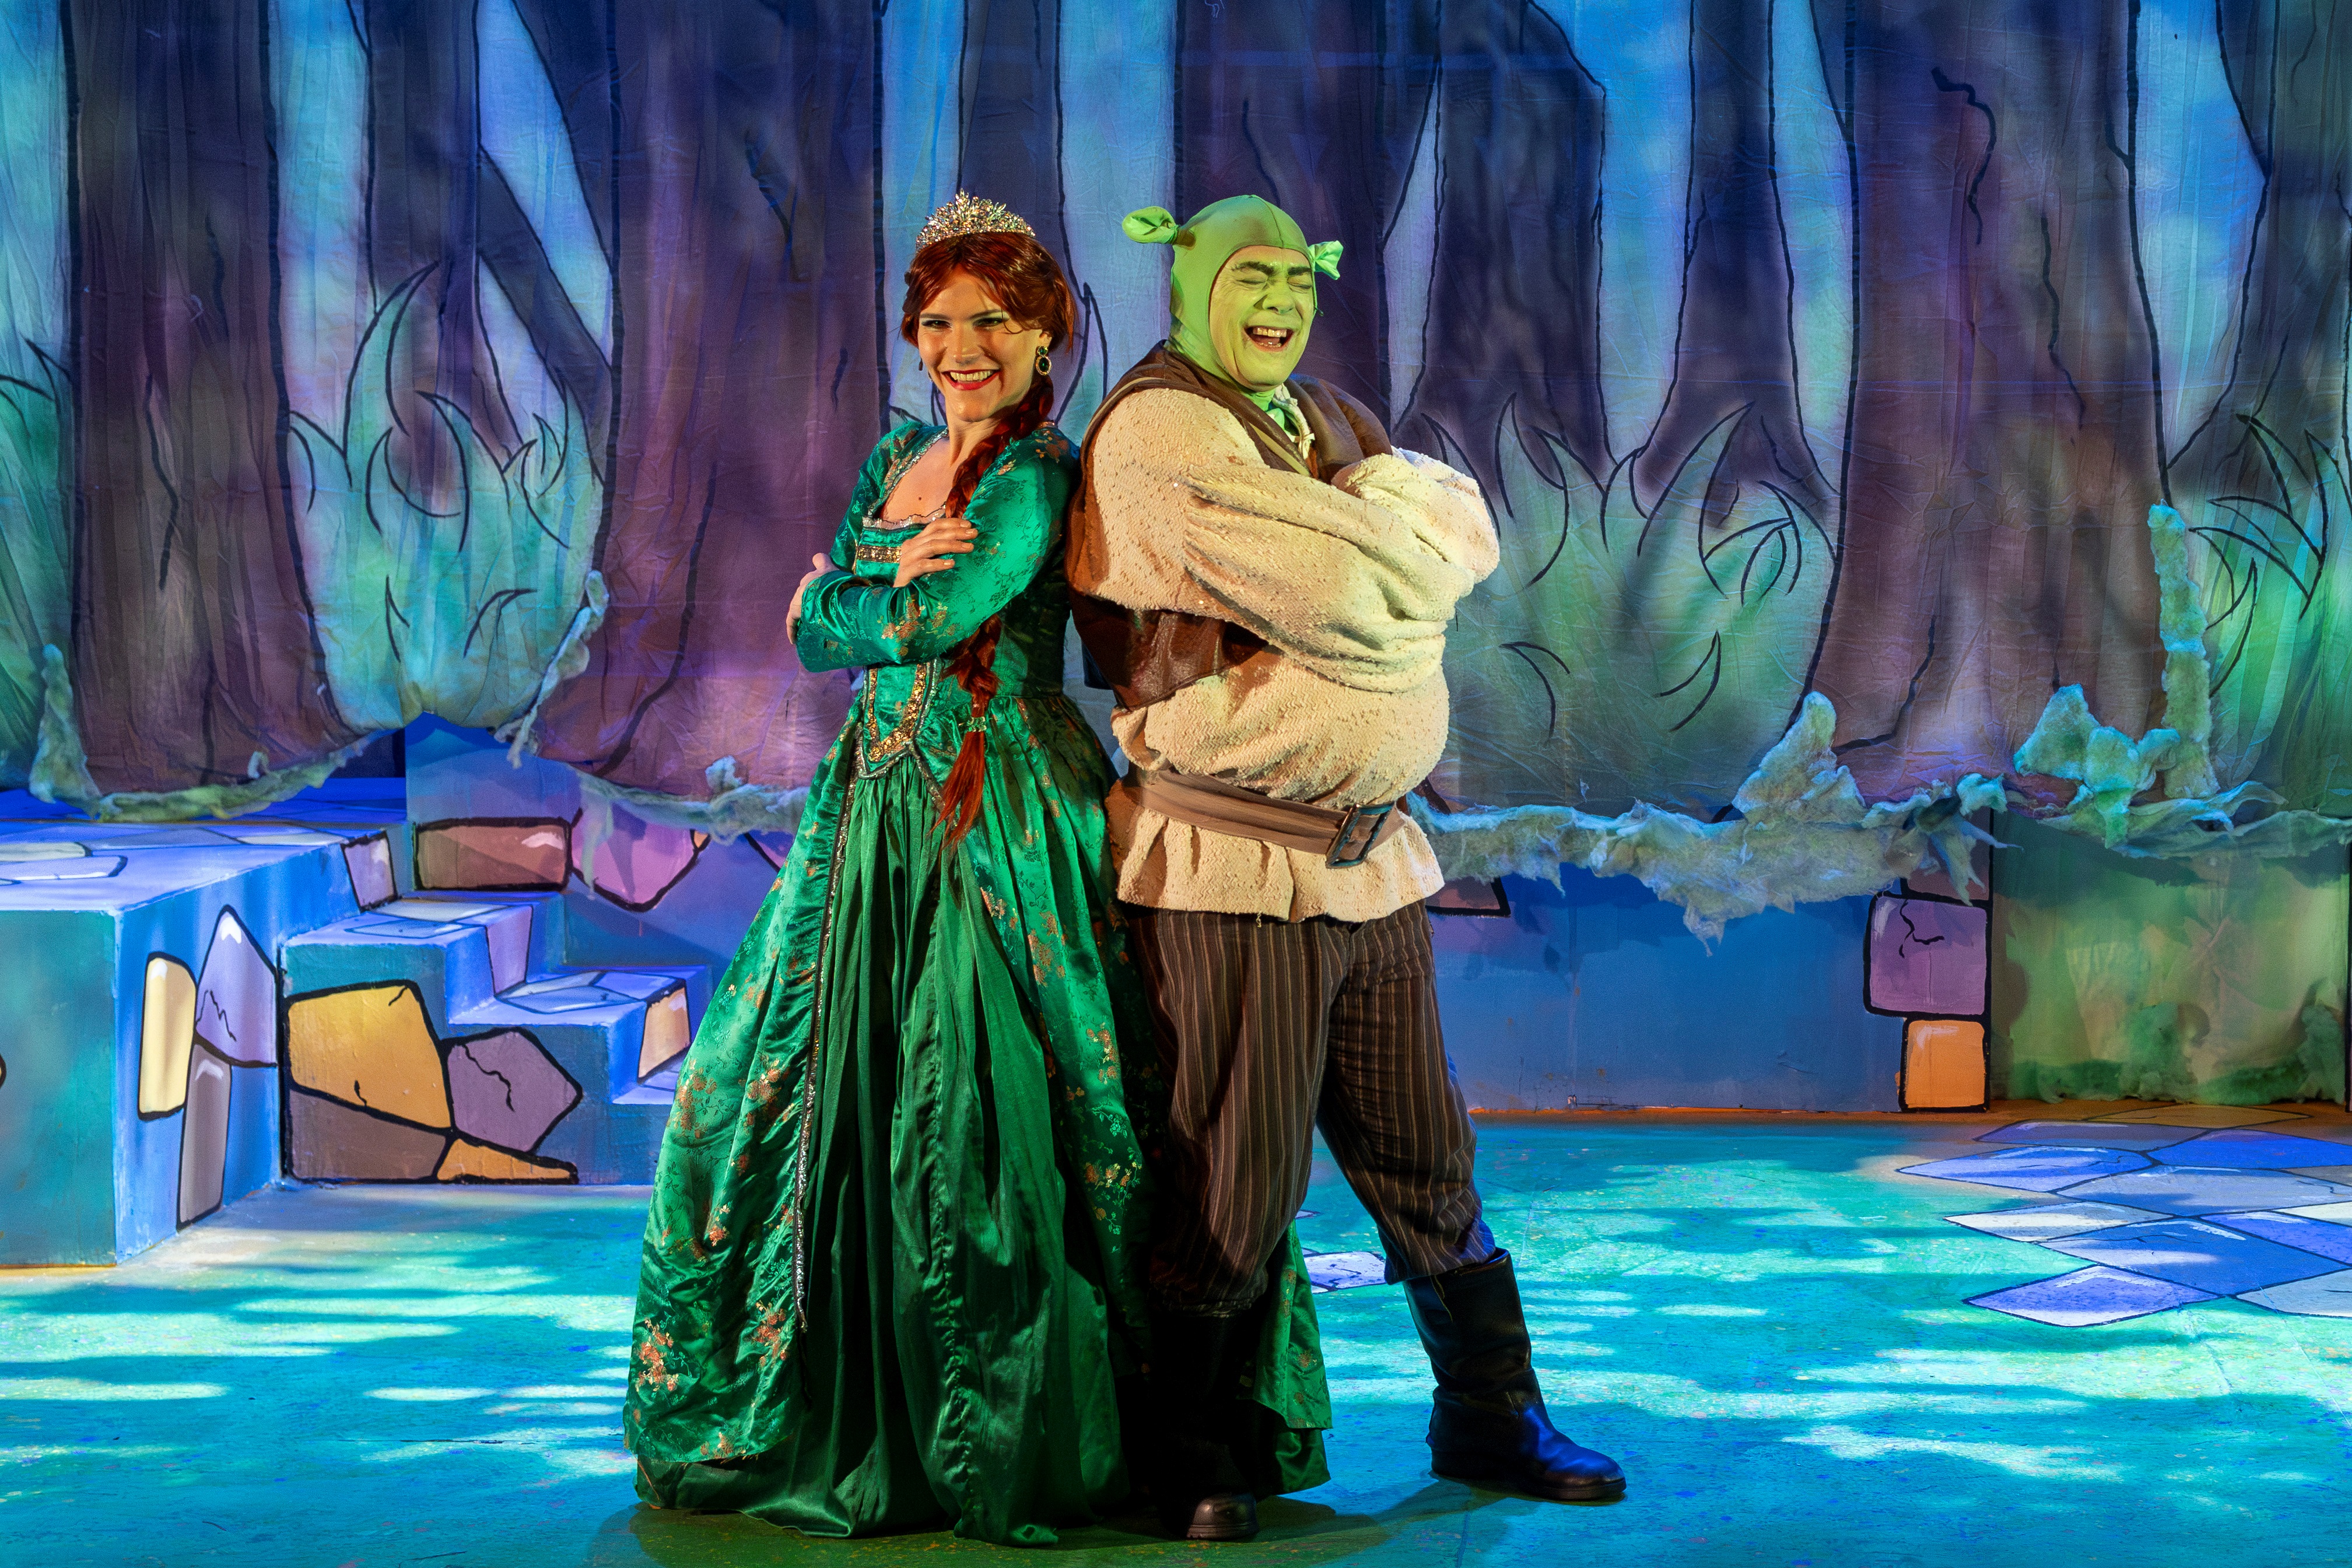 Watch | Shrek the Musical: A tale of true friendship and unity despite being different